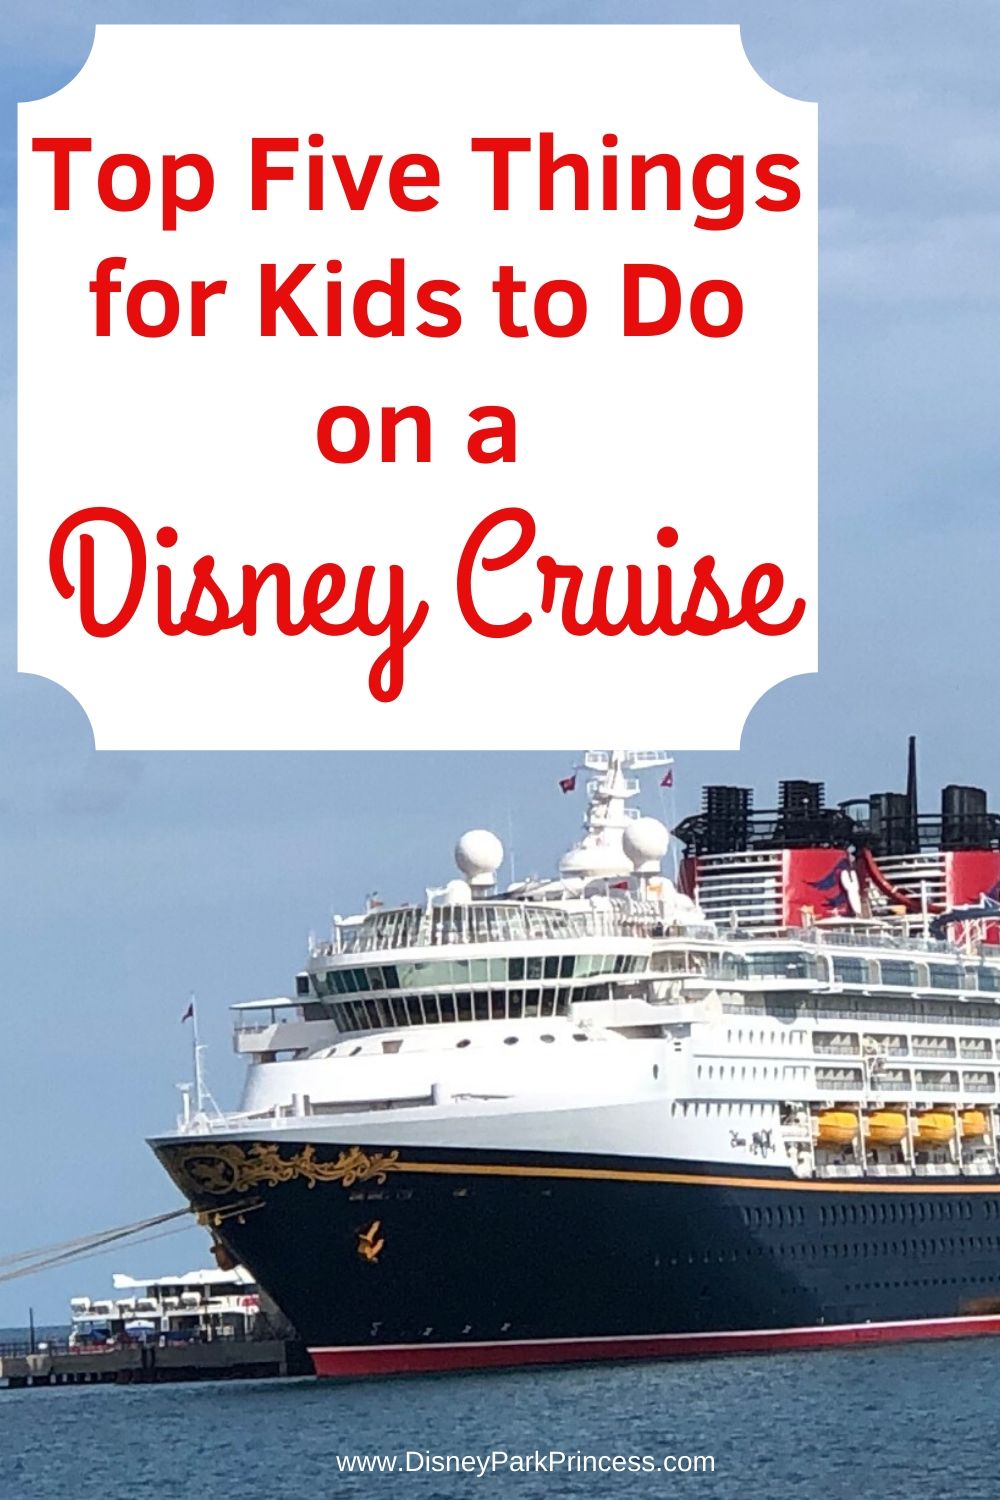 Kids can really let loose and be themselves onboard a Disney Cruise. Here are just a few fun things that kids can do on Disney Cruise Line.